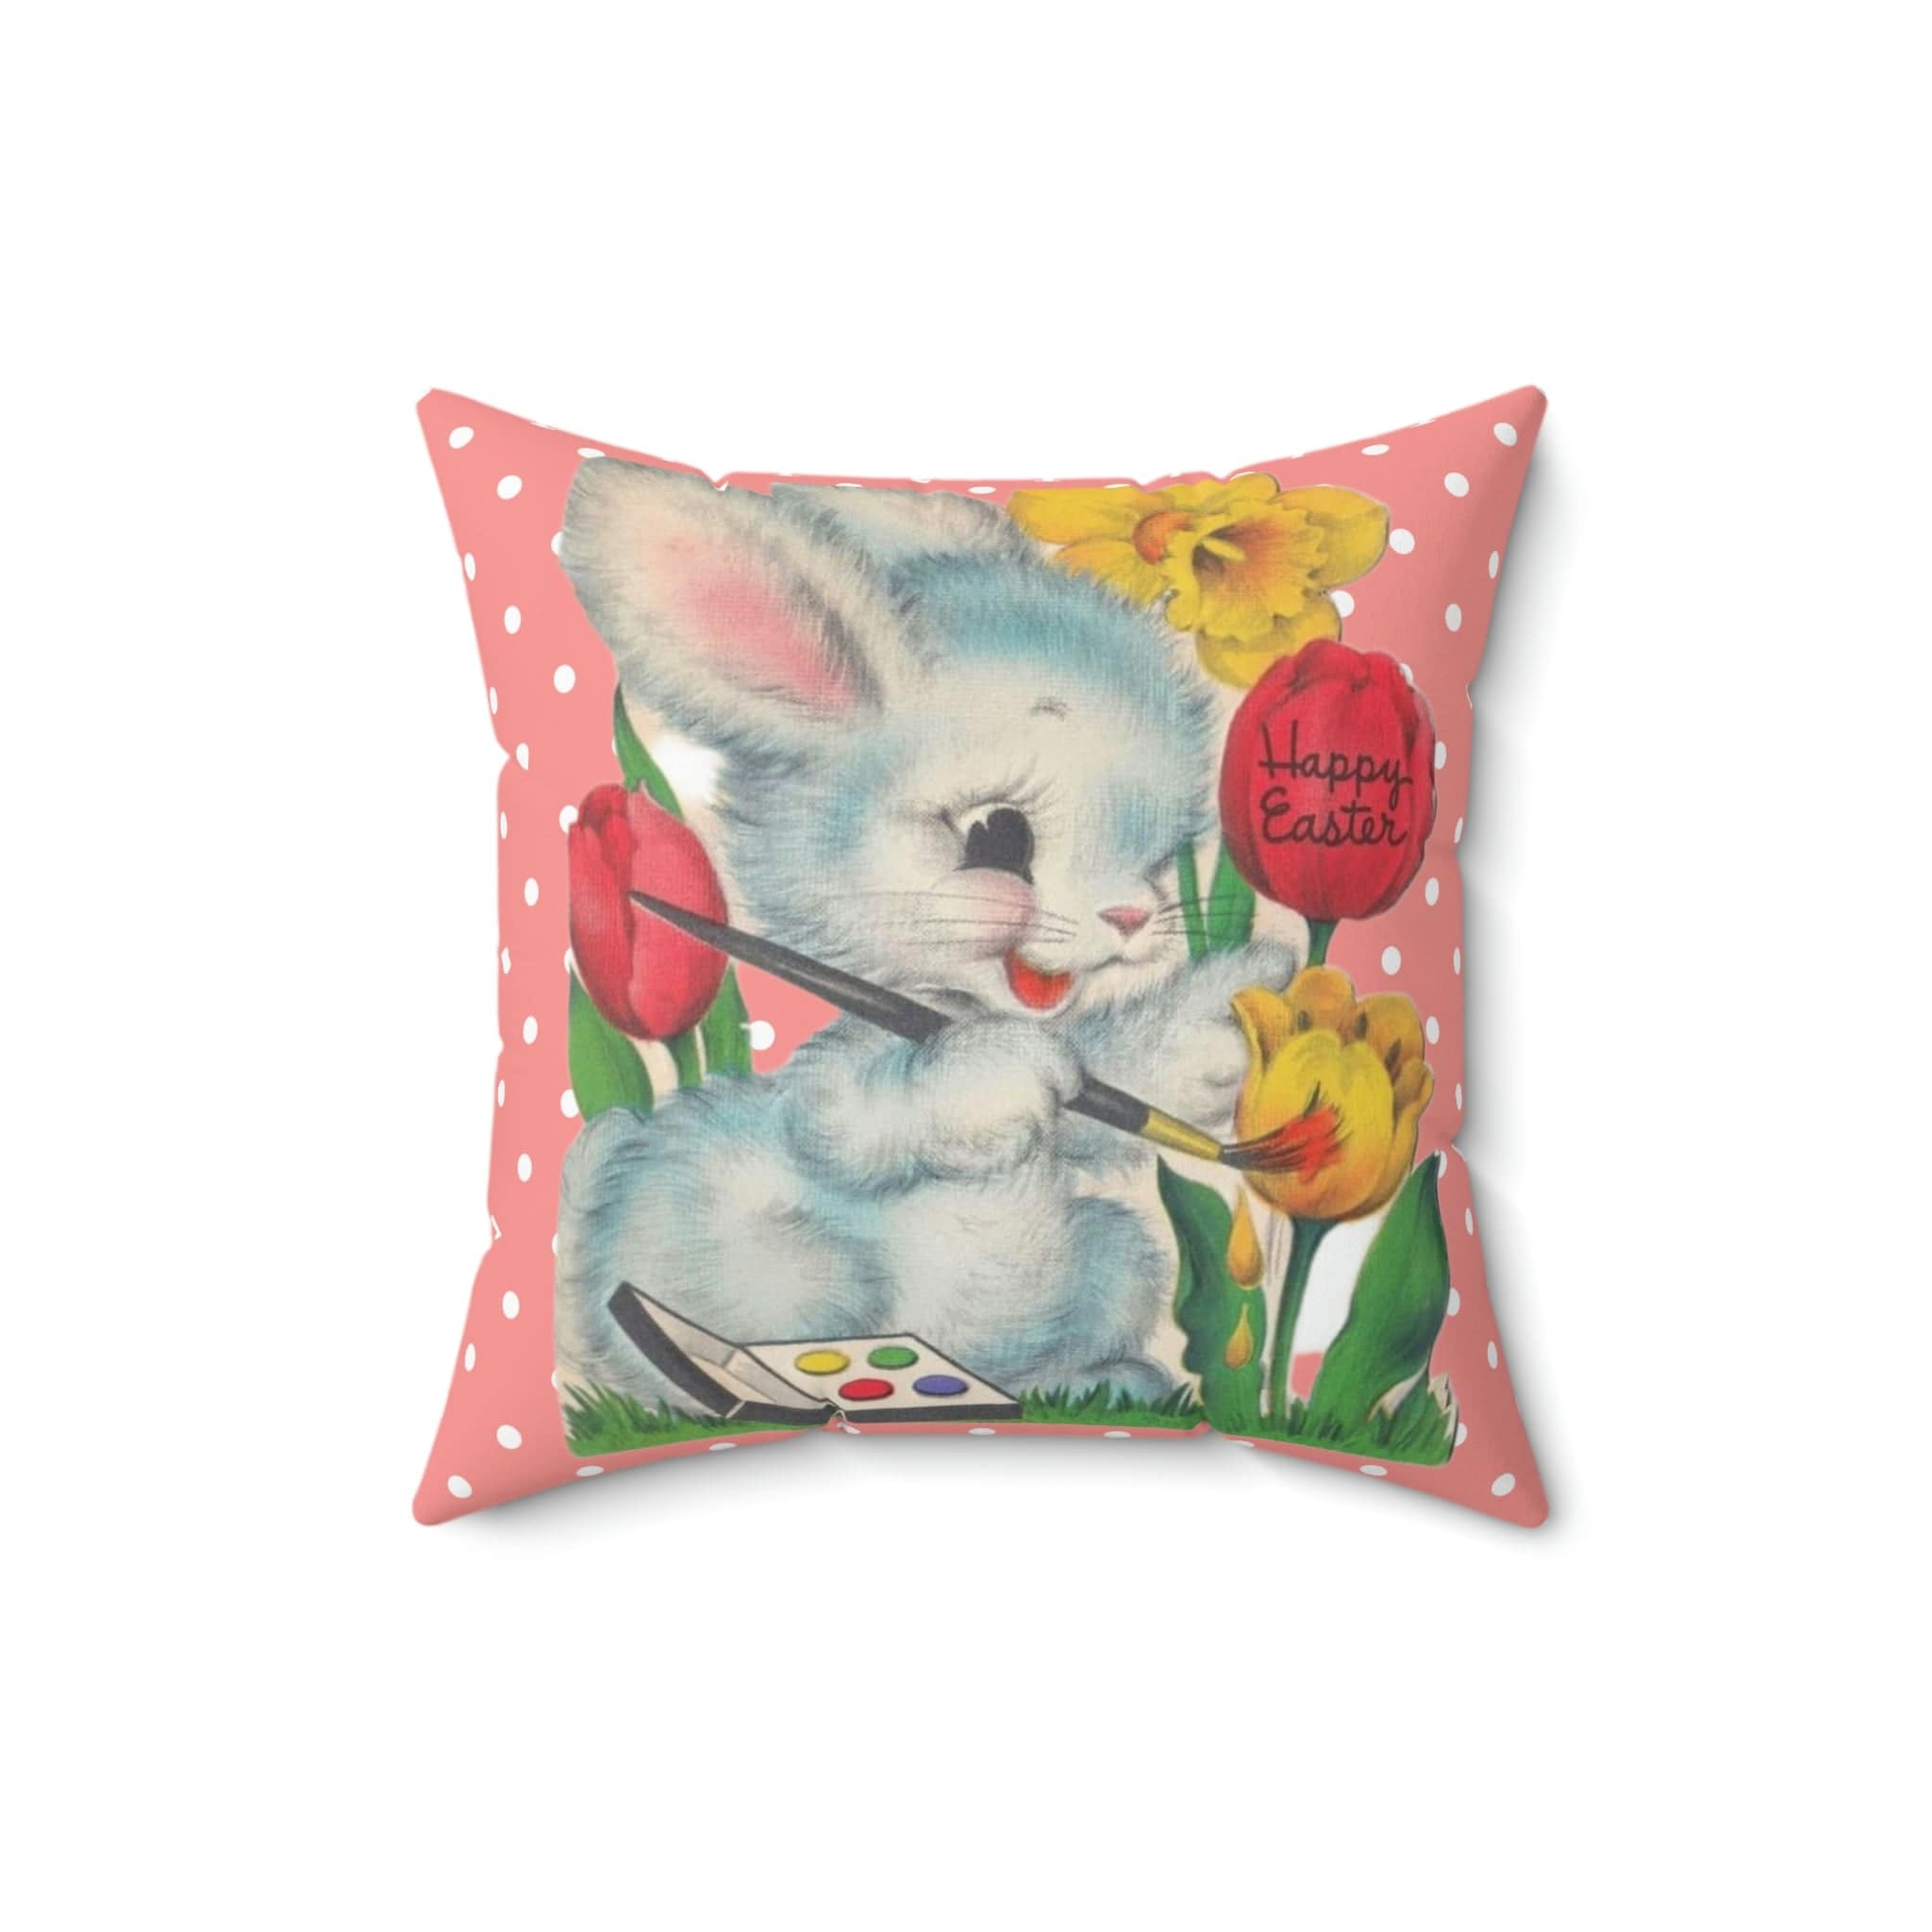 Vintage Easter Card Anthropomorphic Bunny, Happy Easter, Tulips, Kitschy Cute Easter Bunny Artist, Retro Spring Pillow And Insert Home Decor 16&quot; × 16&quot;